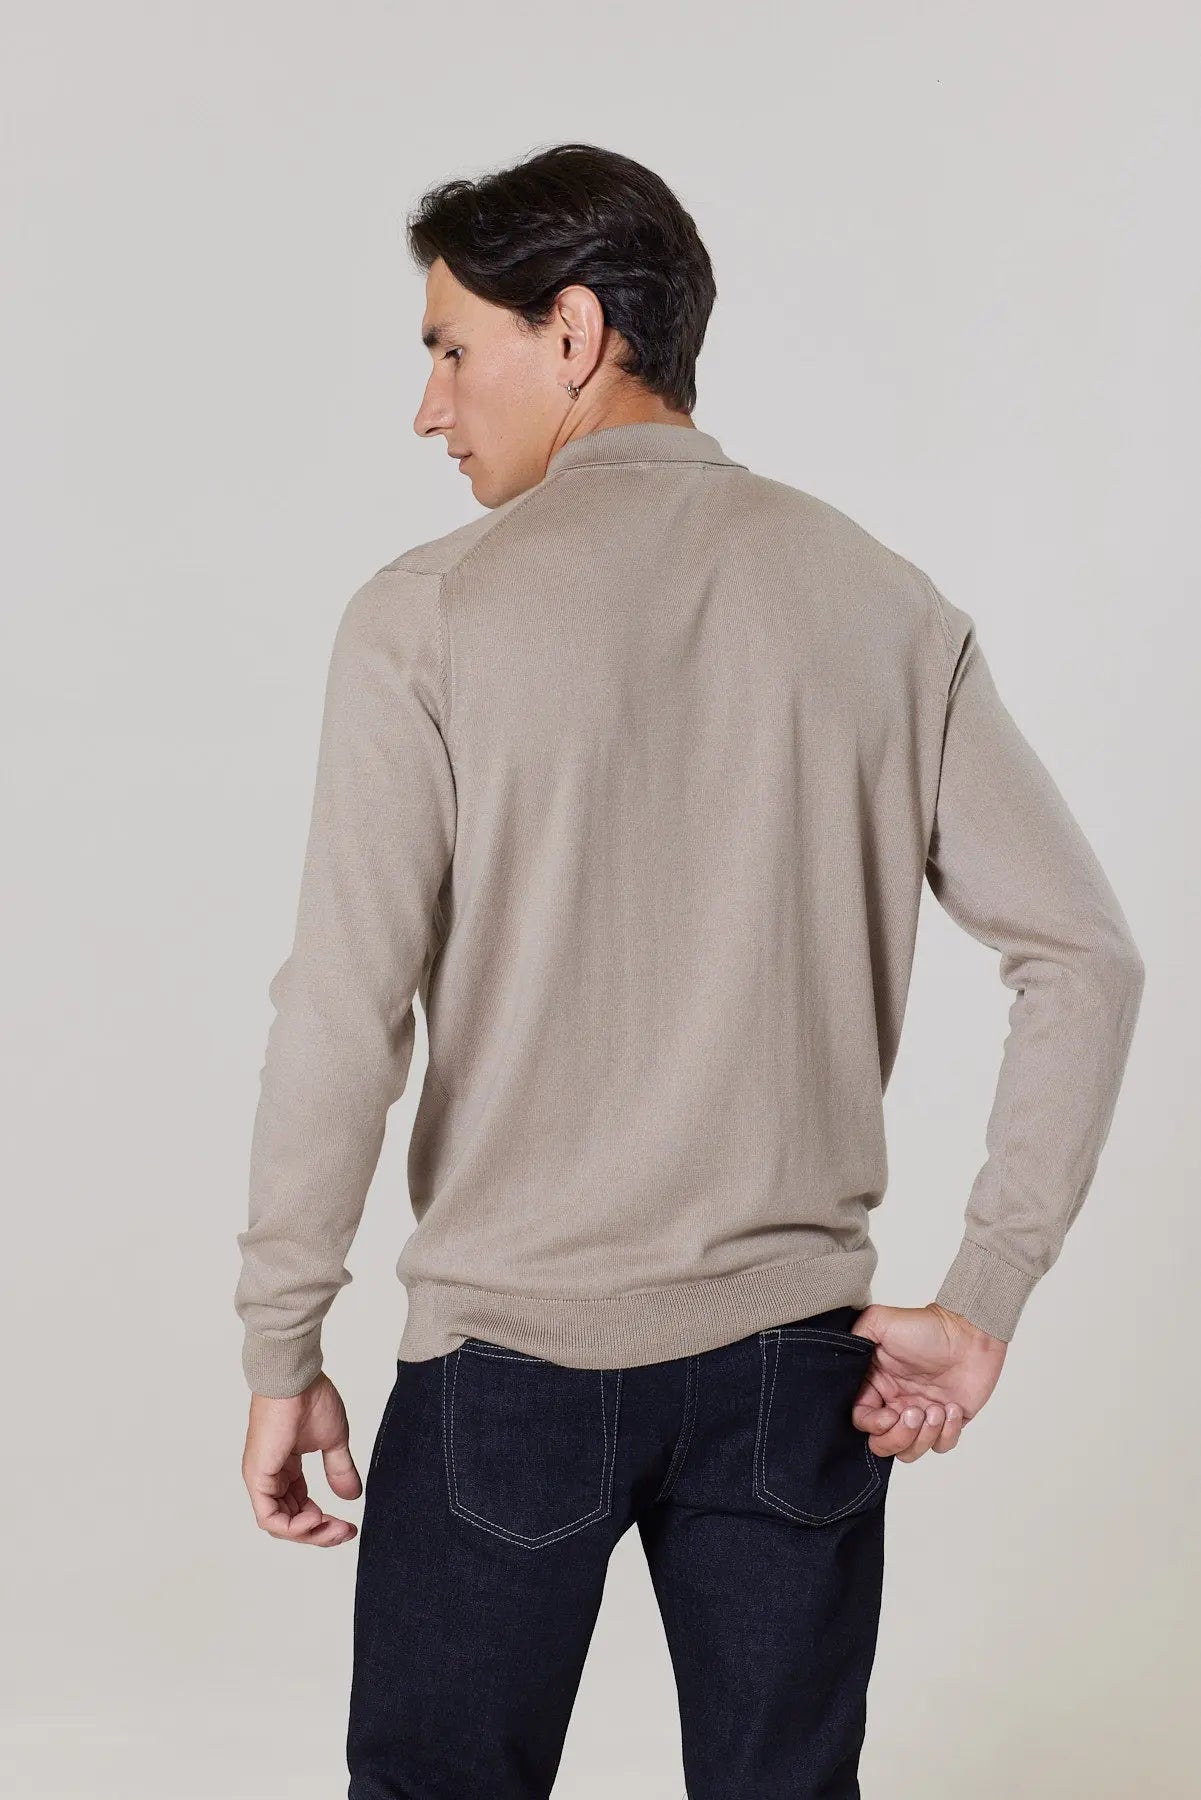 Cable Polo Shirt - Stone knitwear